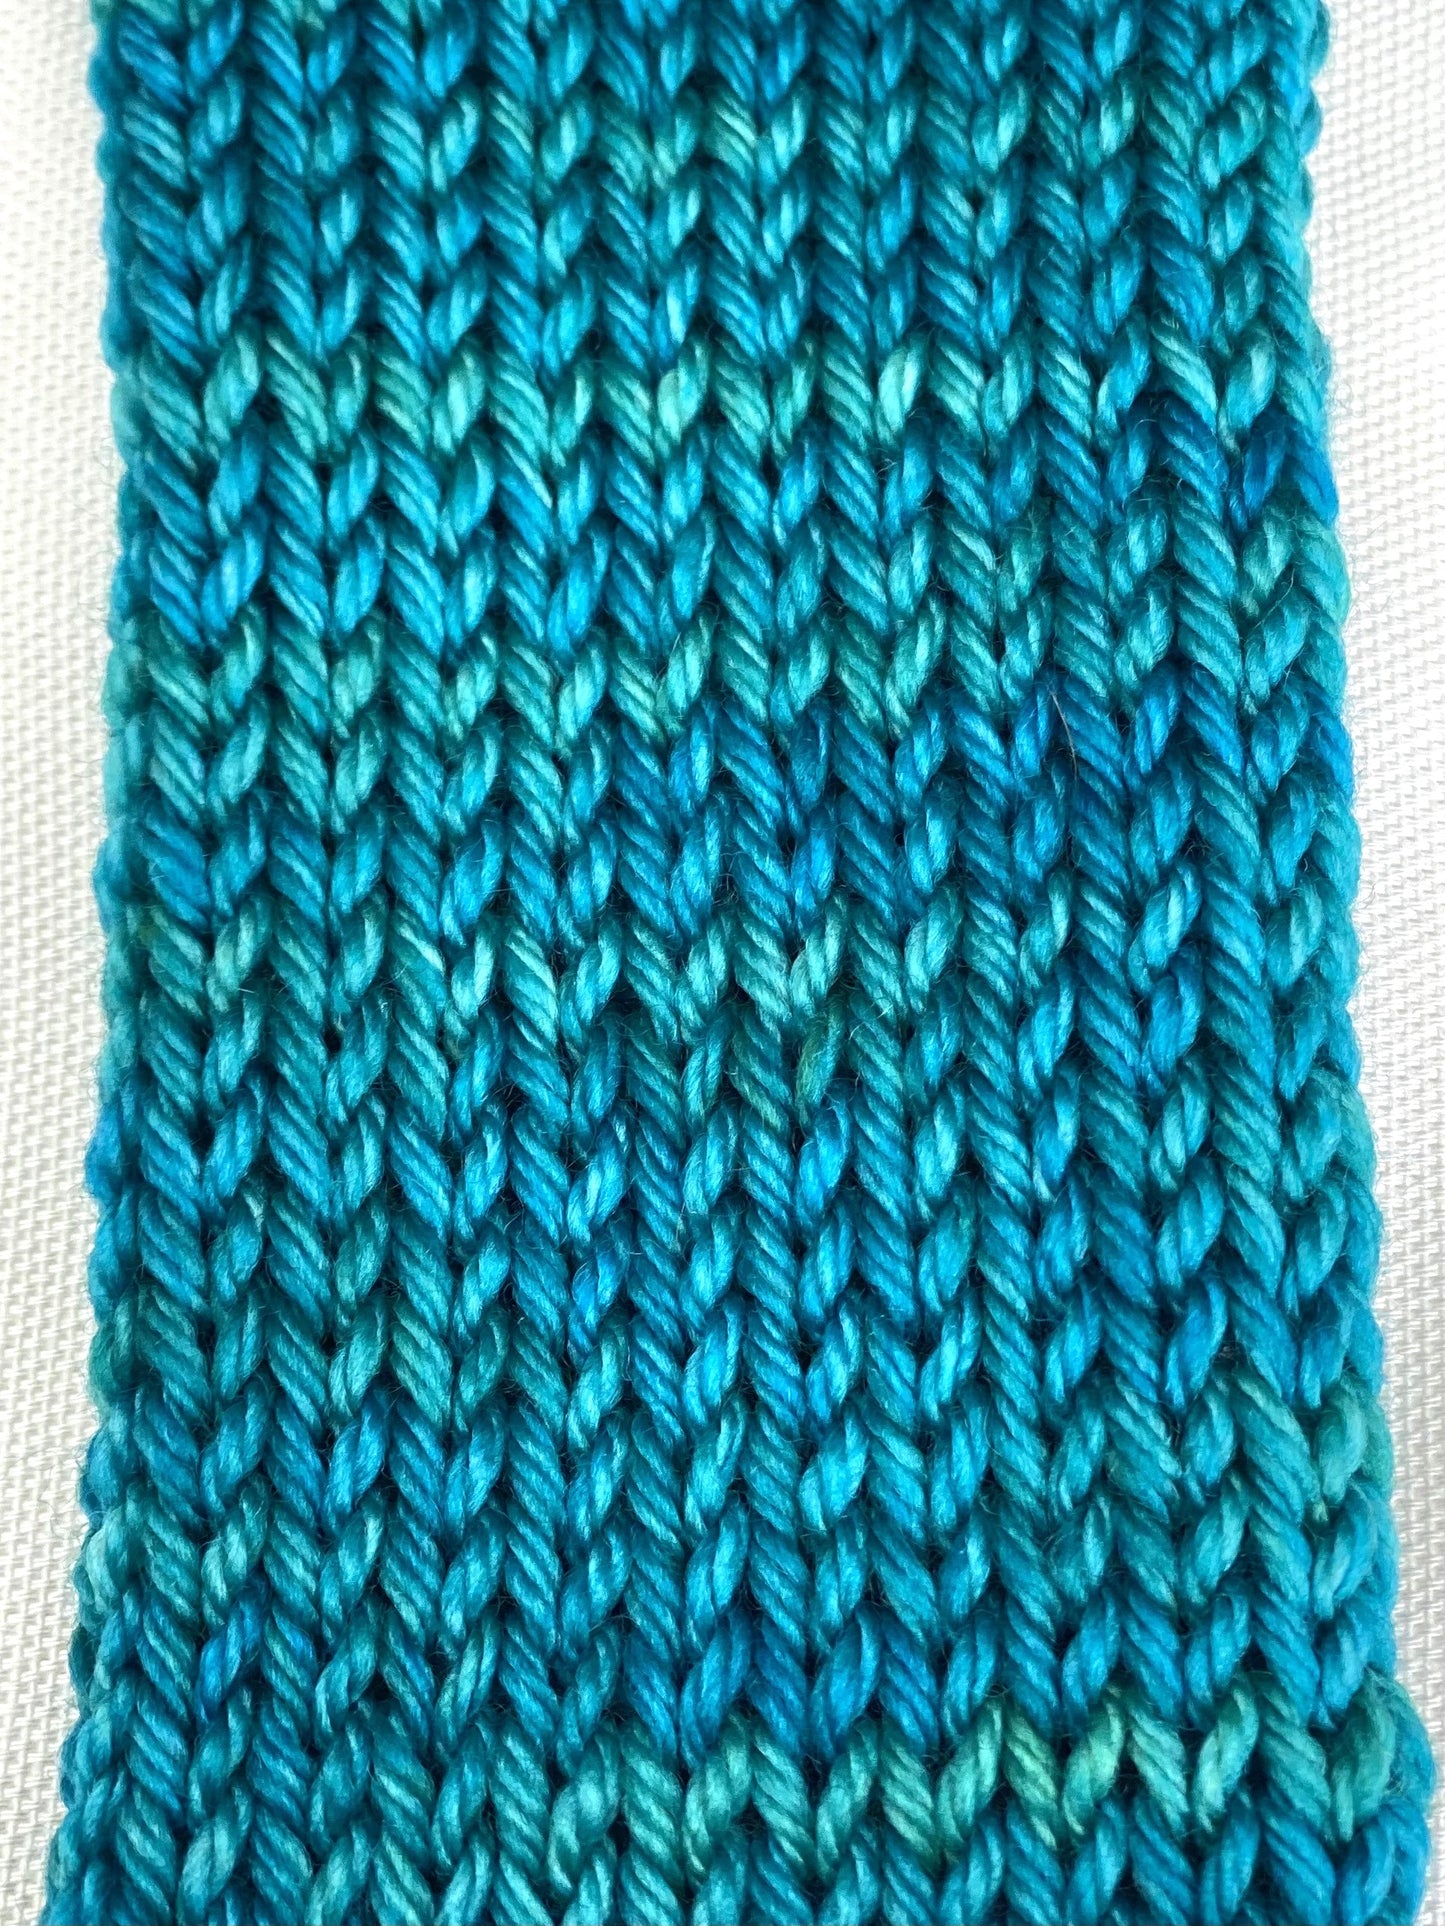 Winter Pillow Worsted / North Shore Teal